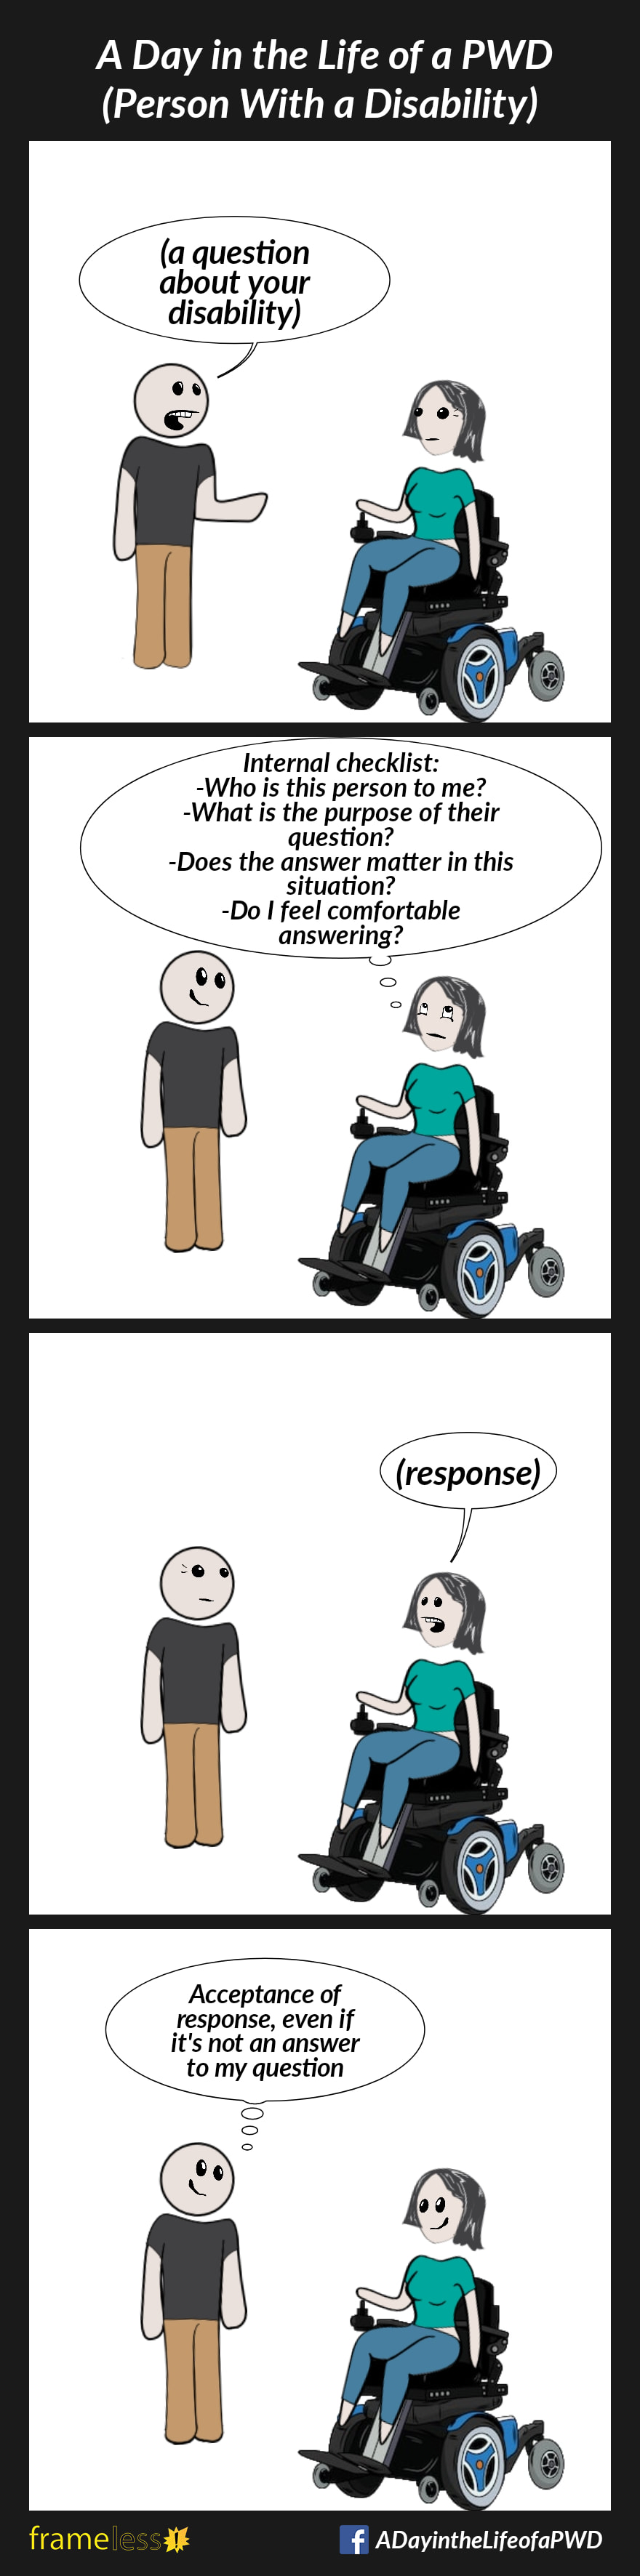 COMIC STRIP 
A Day in the Life of a PWD (Person With a Disability) 

Frame 1:
A woman in a power wheelchair is approached by a man.
MAN: (a question about your disability)

Frame 2:
WOMAN (thinking to herself): 
Internal checklist:
-Who is this person to me?
-What is the purpose of thier question?
-Does the answer matter in this situation?
-Do I feel comfortable answering?

Frame 3:
WOMAN: (response)

Frame 4:
MAN (thinking to himself): Acceptance of response, even if it's not an answer to my question 